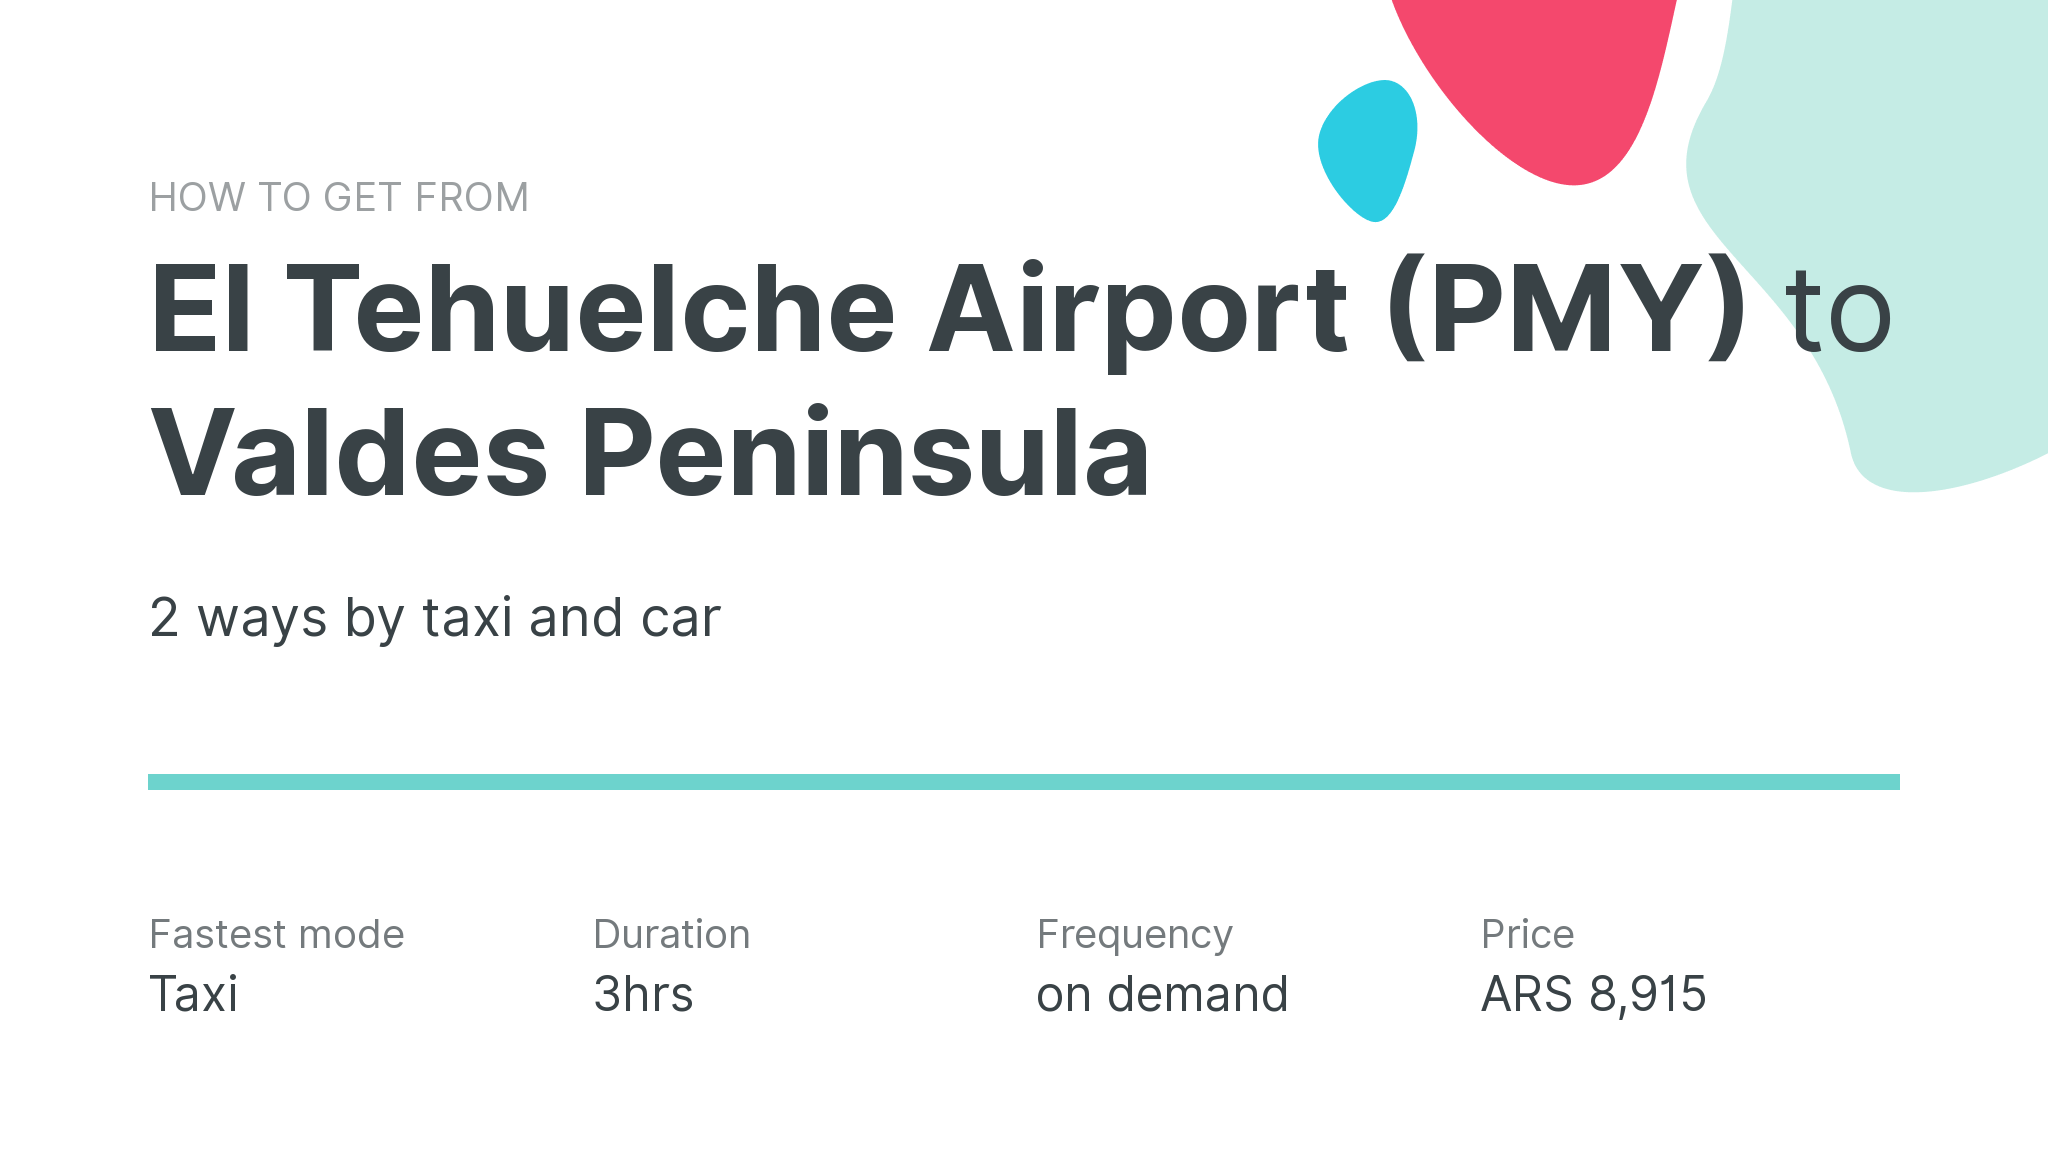 How do I get from El Tehuelche Airport (PMY) to Valdes Peninsula